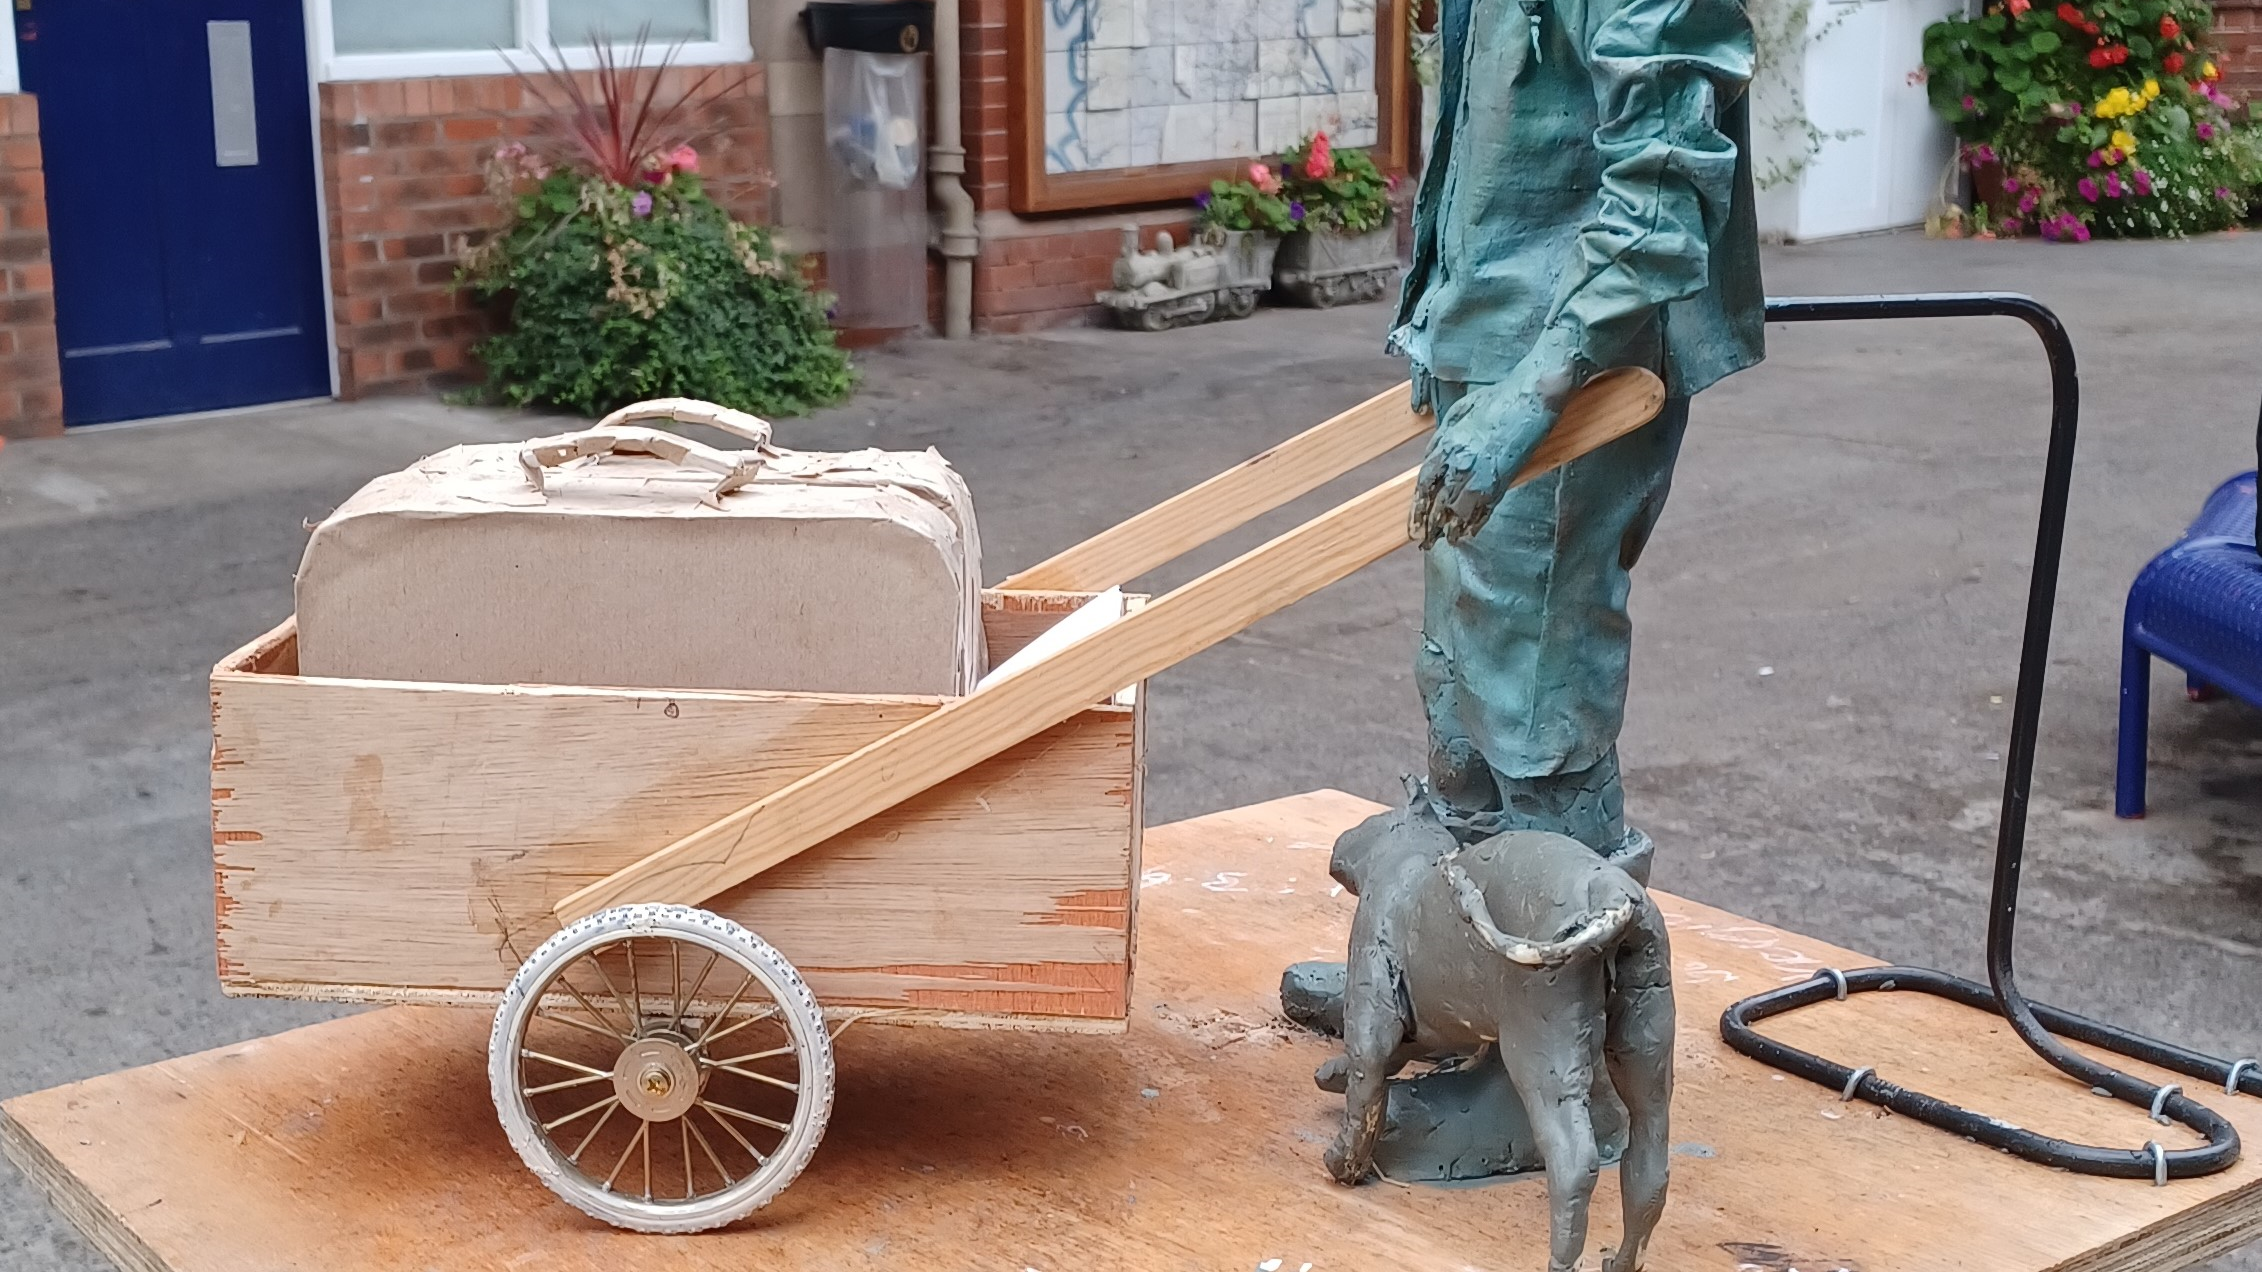 This image shows the scale model of the Barrow Boy sculpture-2